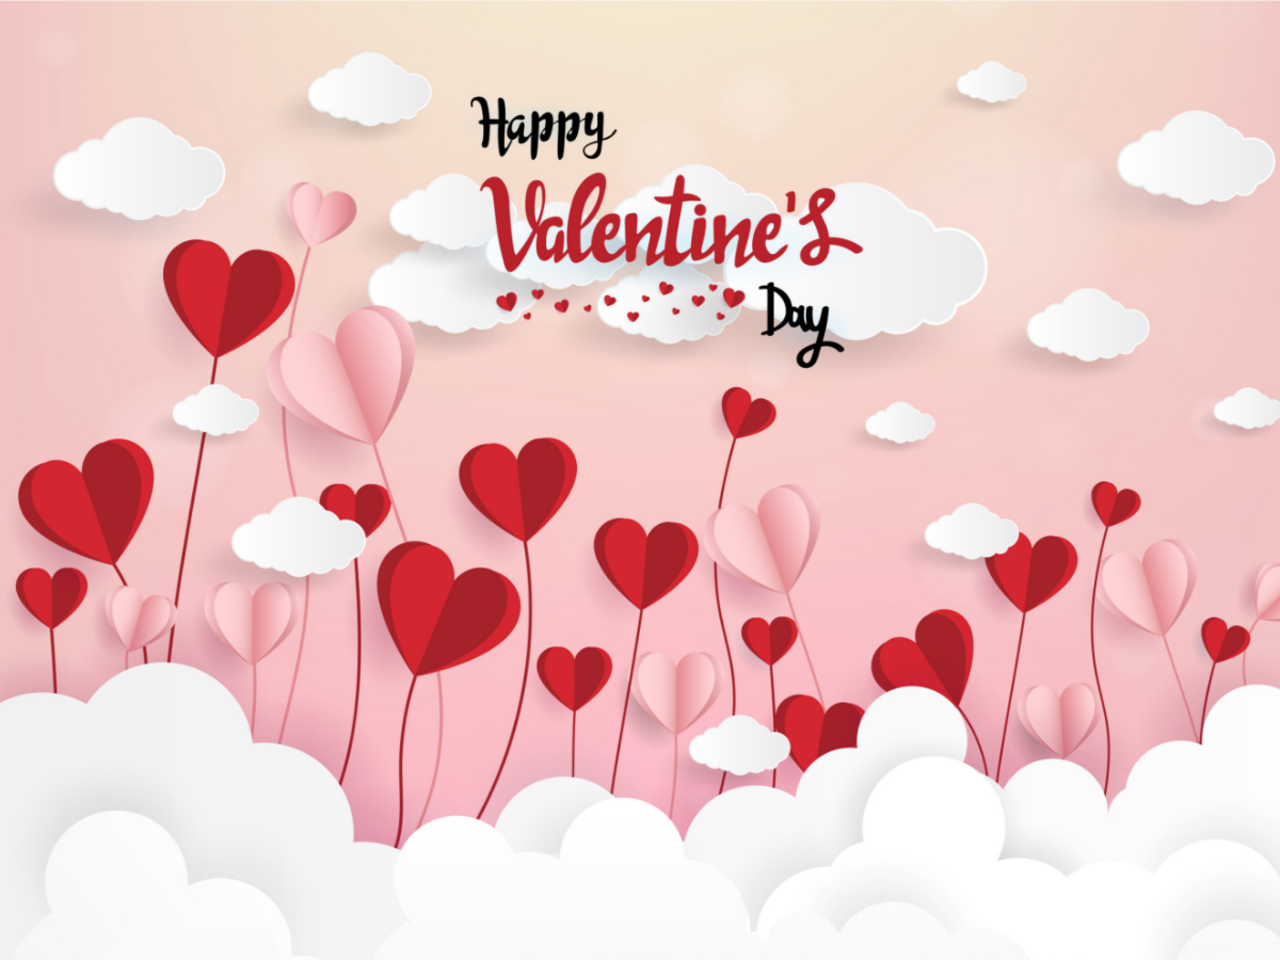 Happy Valentine's Day 2023: Wishes, Messages, Images, Quotes ...